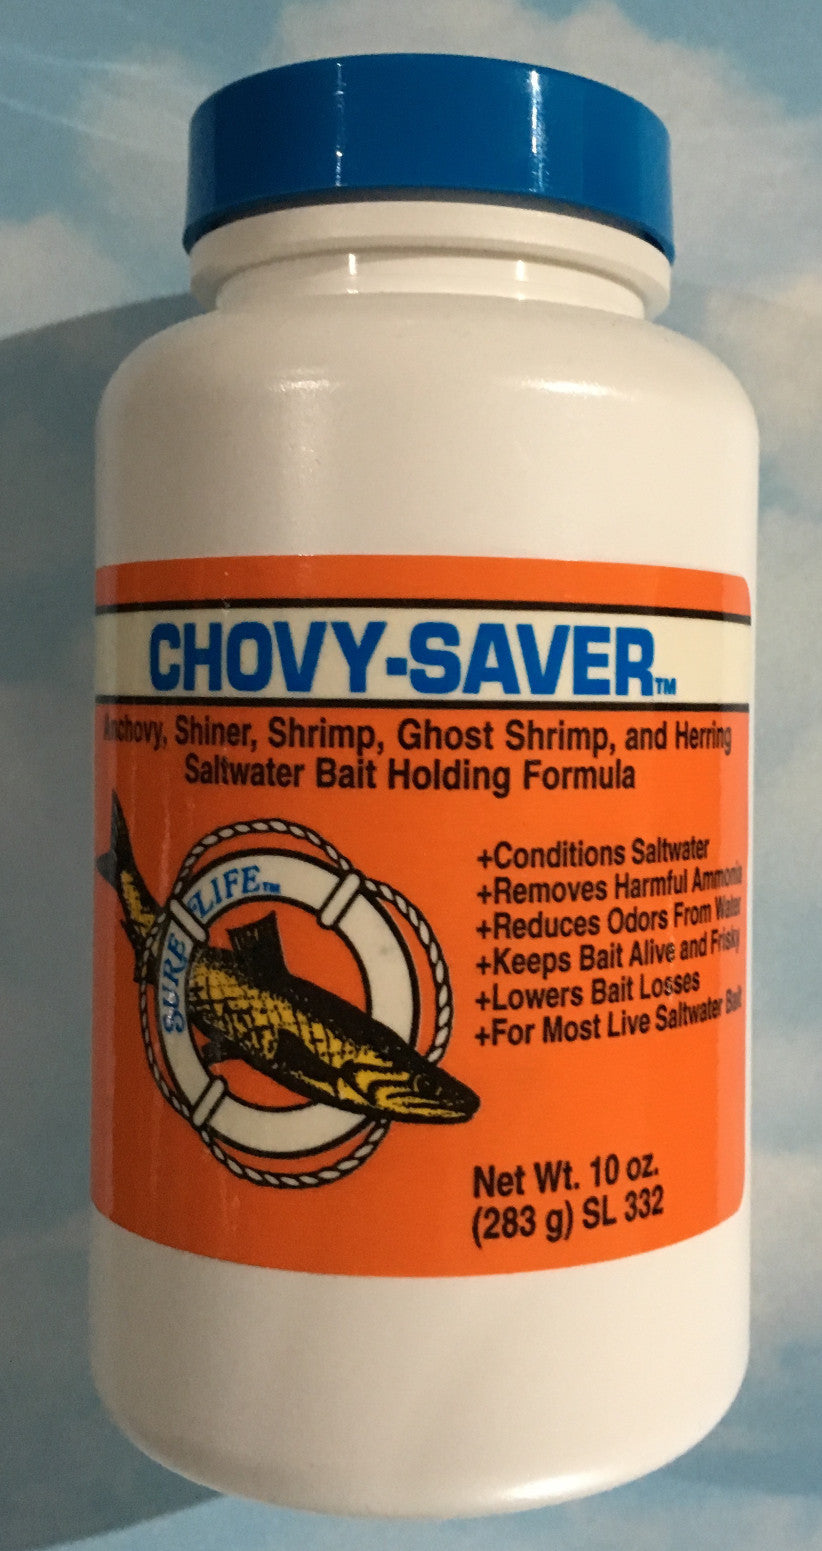 CHOVY SAVER Saltwater Bait Holding Formula by Sure Life – Fishing